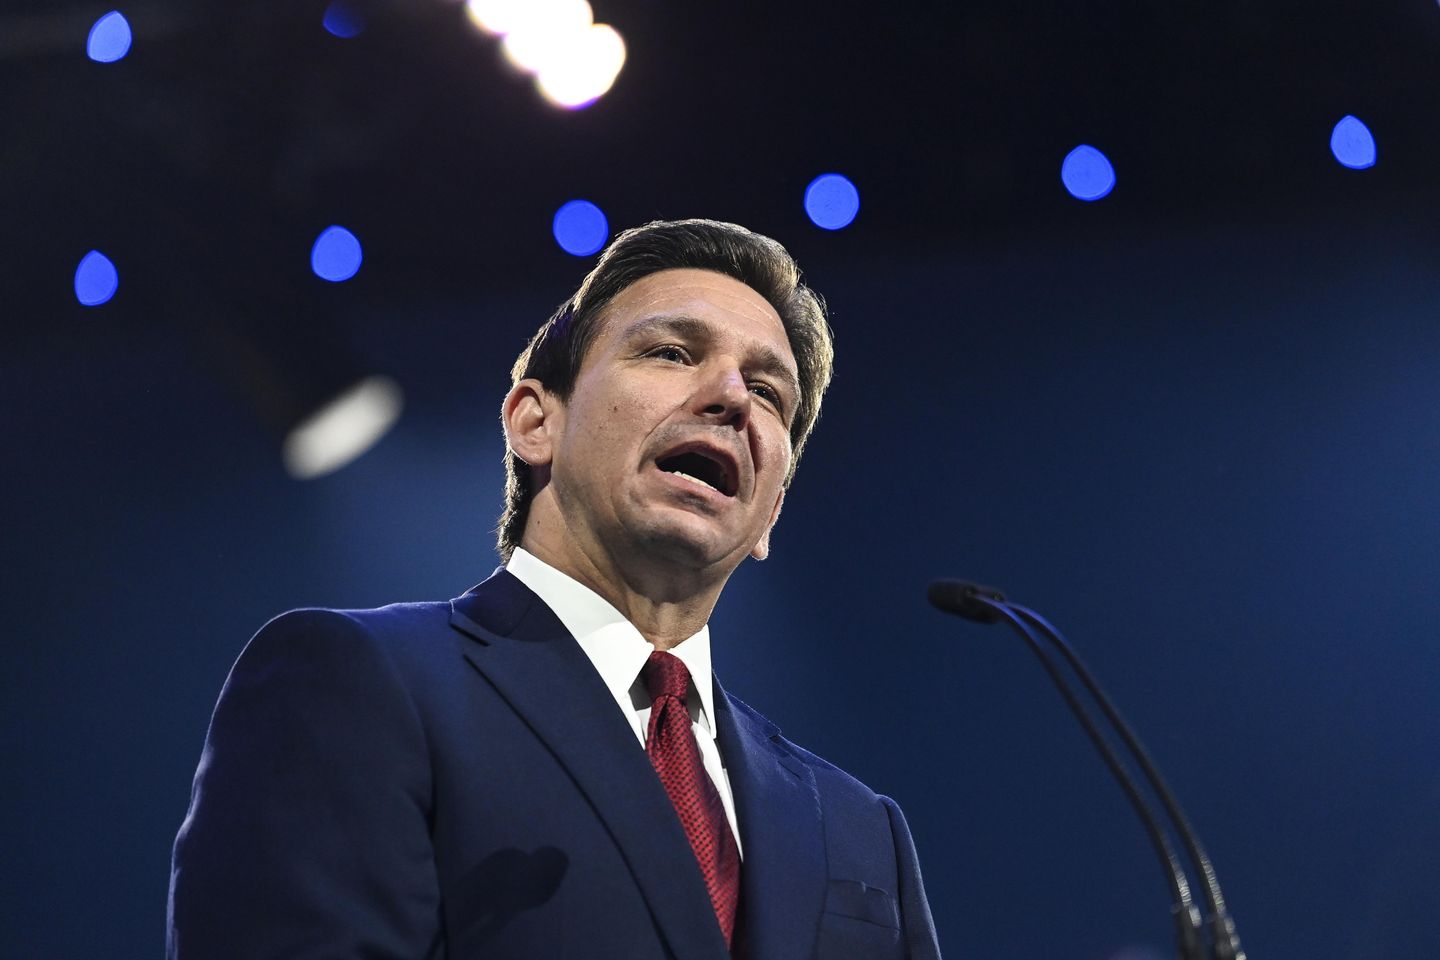 Ron DeSantis, after Twitter event botched, launches 2024 bid in video pledging 'American comeback'